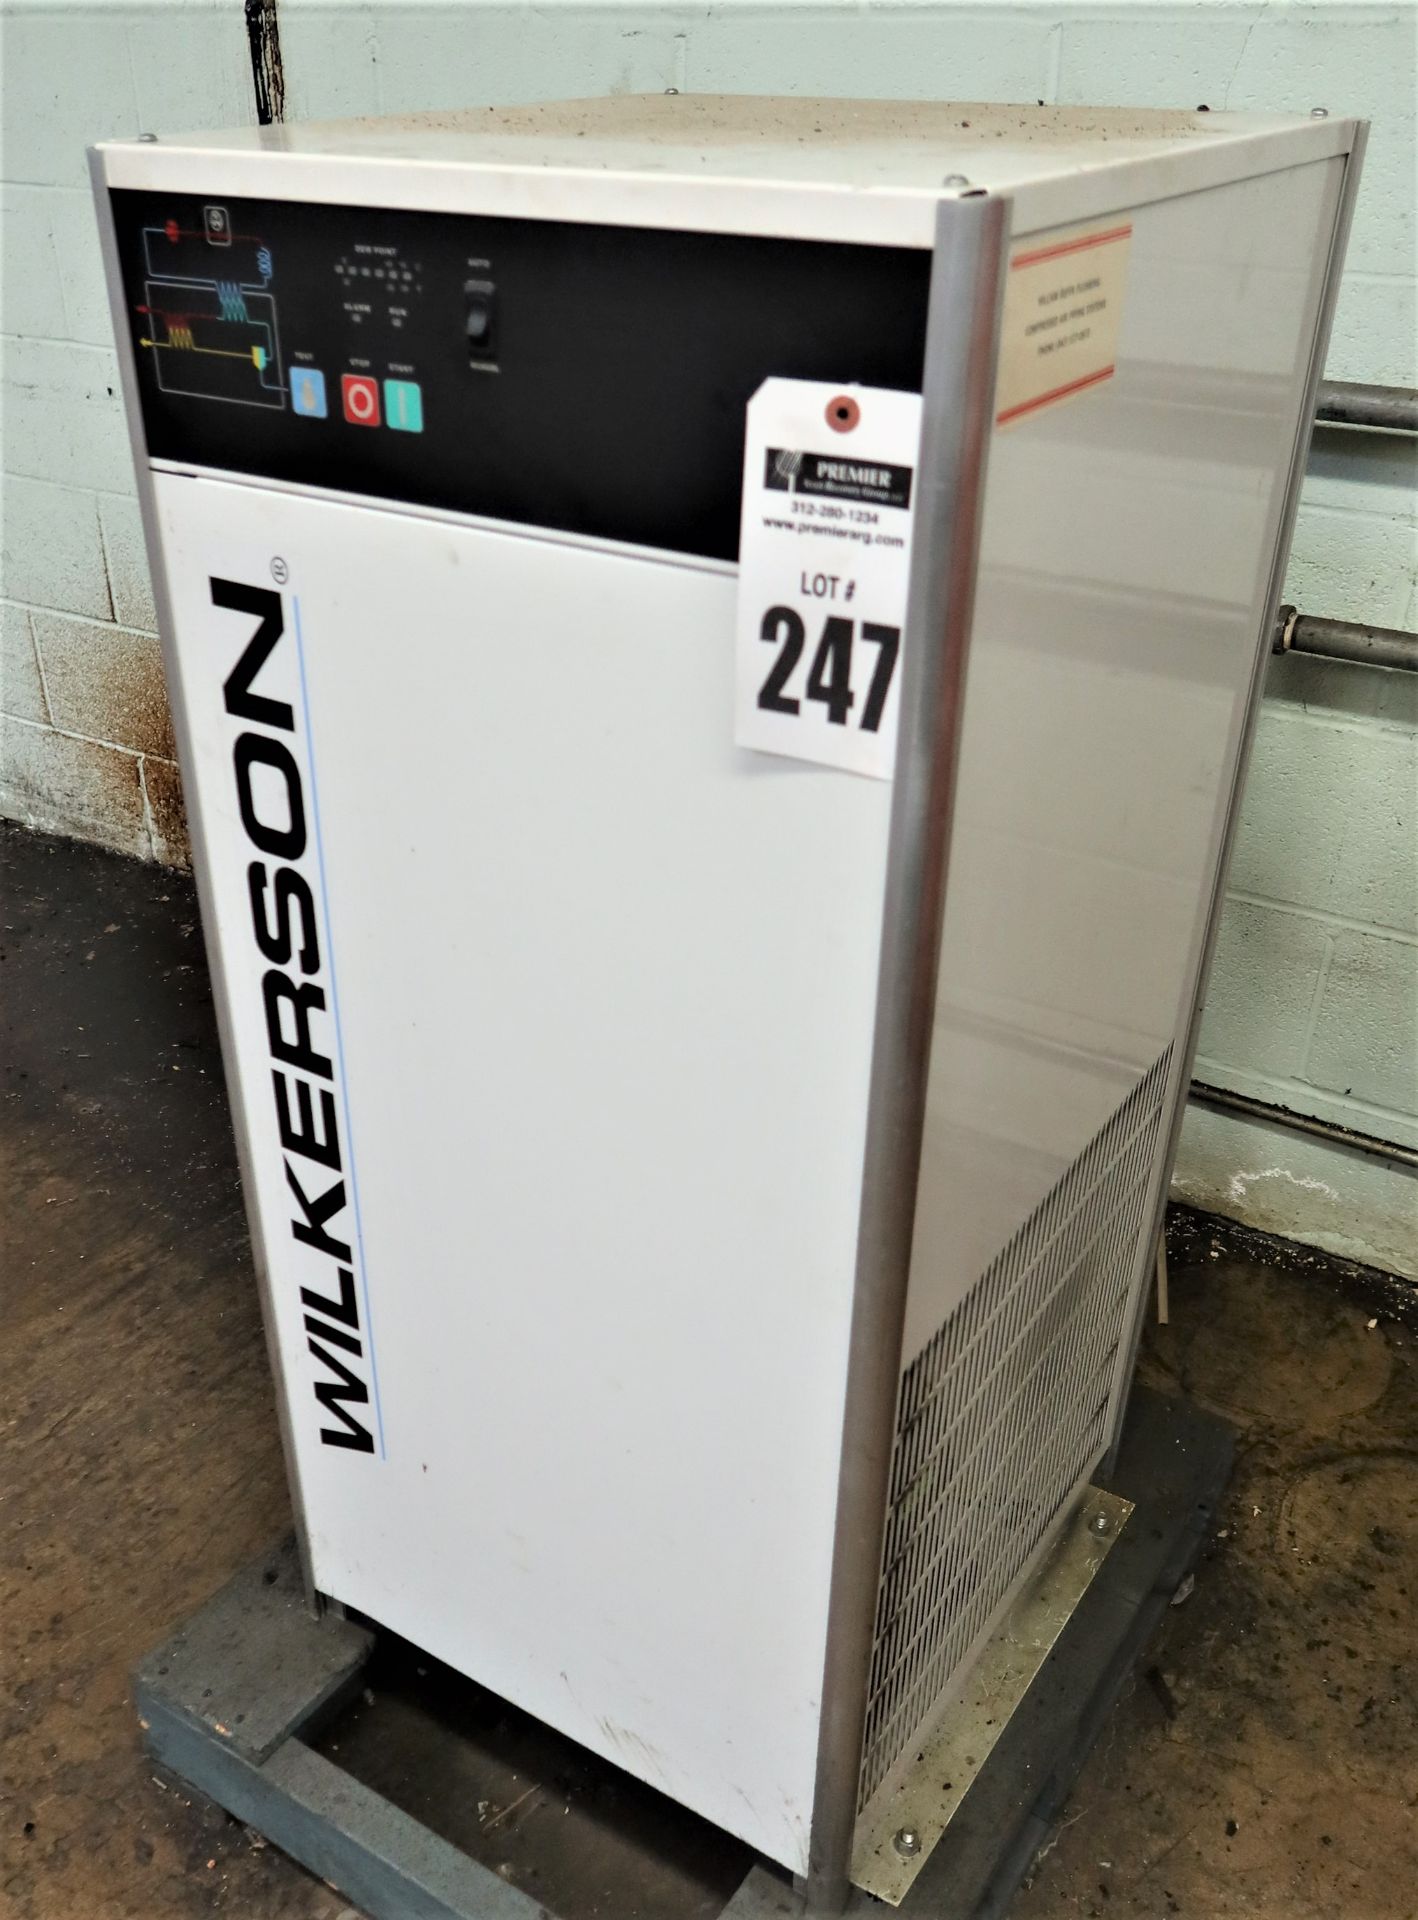 Wilkerson WRD100A-1 Refrigerated Air Dryer, S/N 723-06-02-1999-5823 - Image 4 of 4